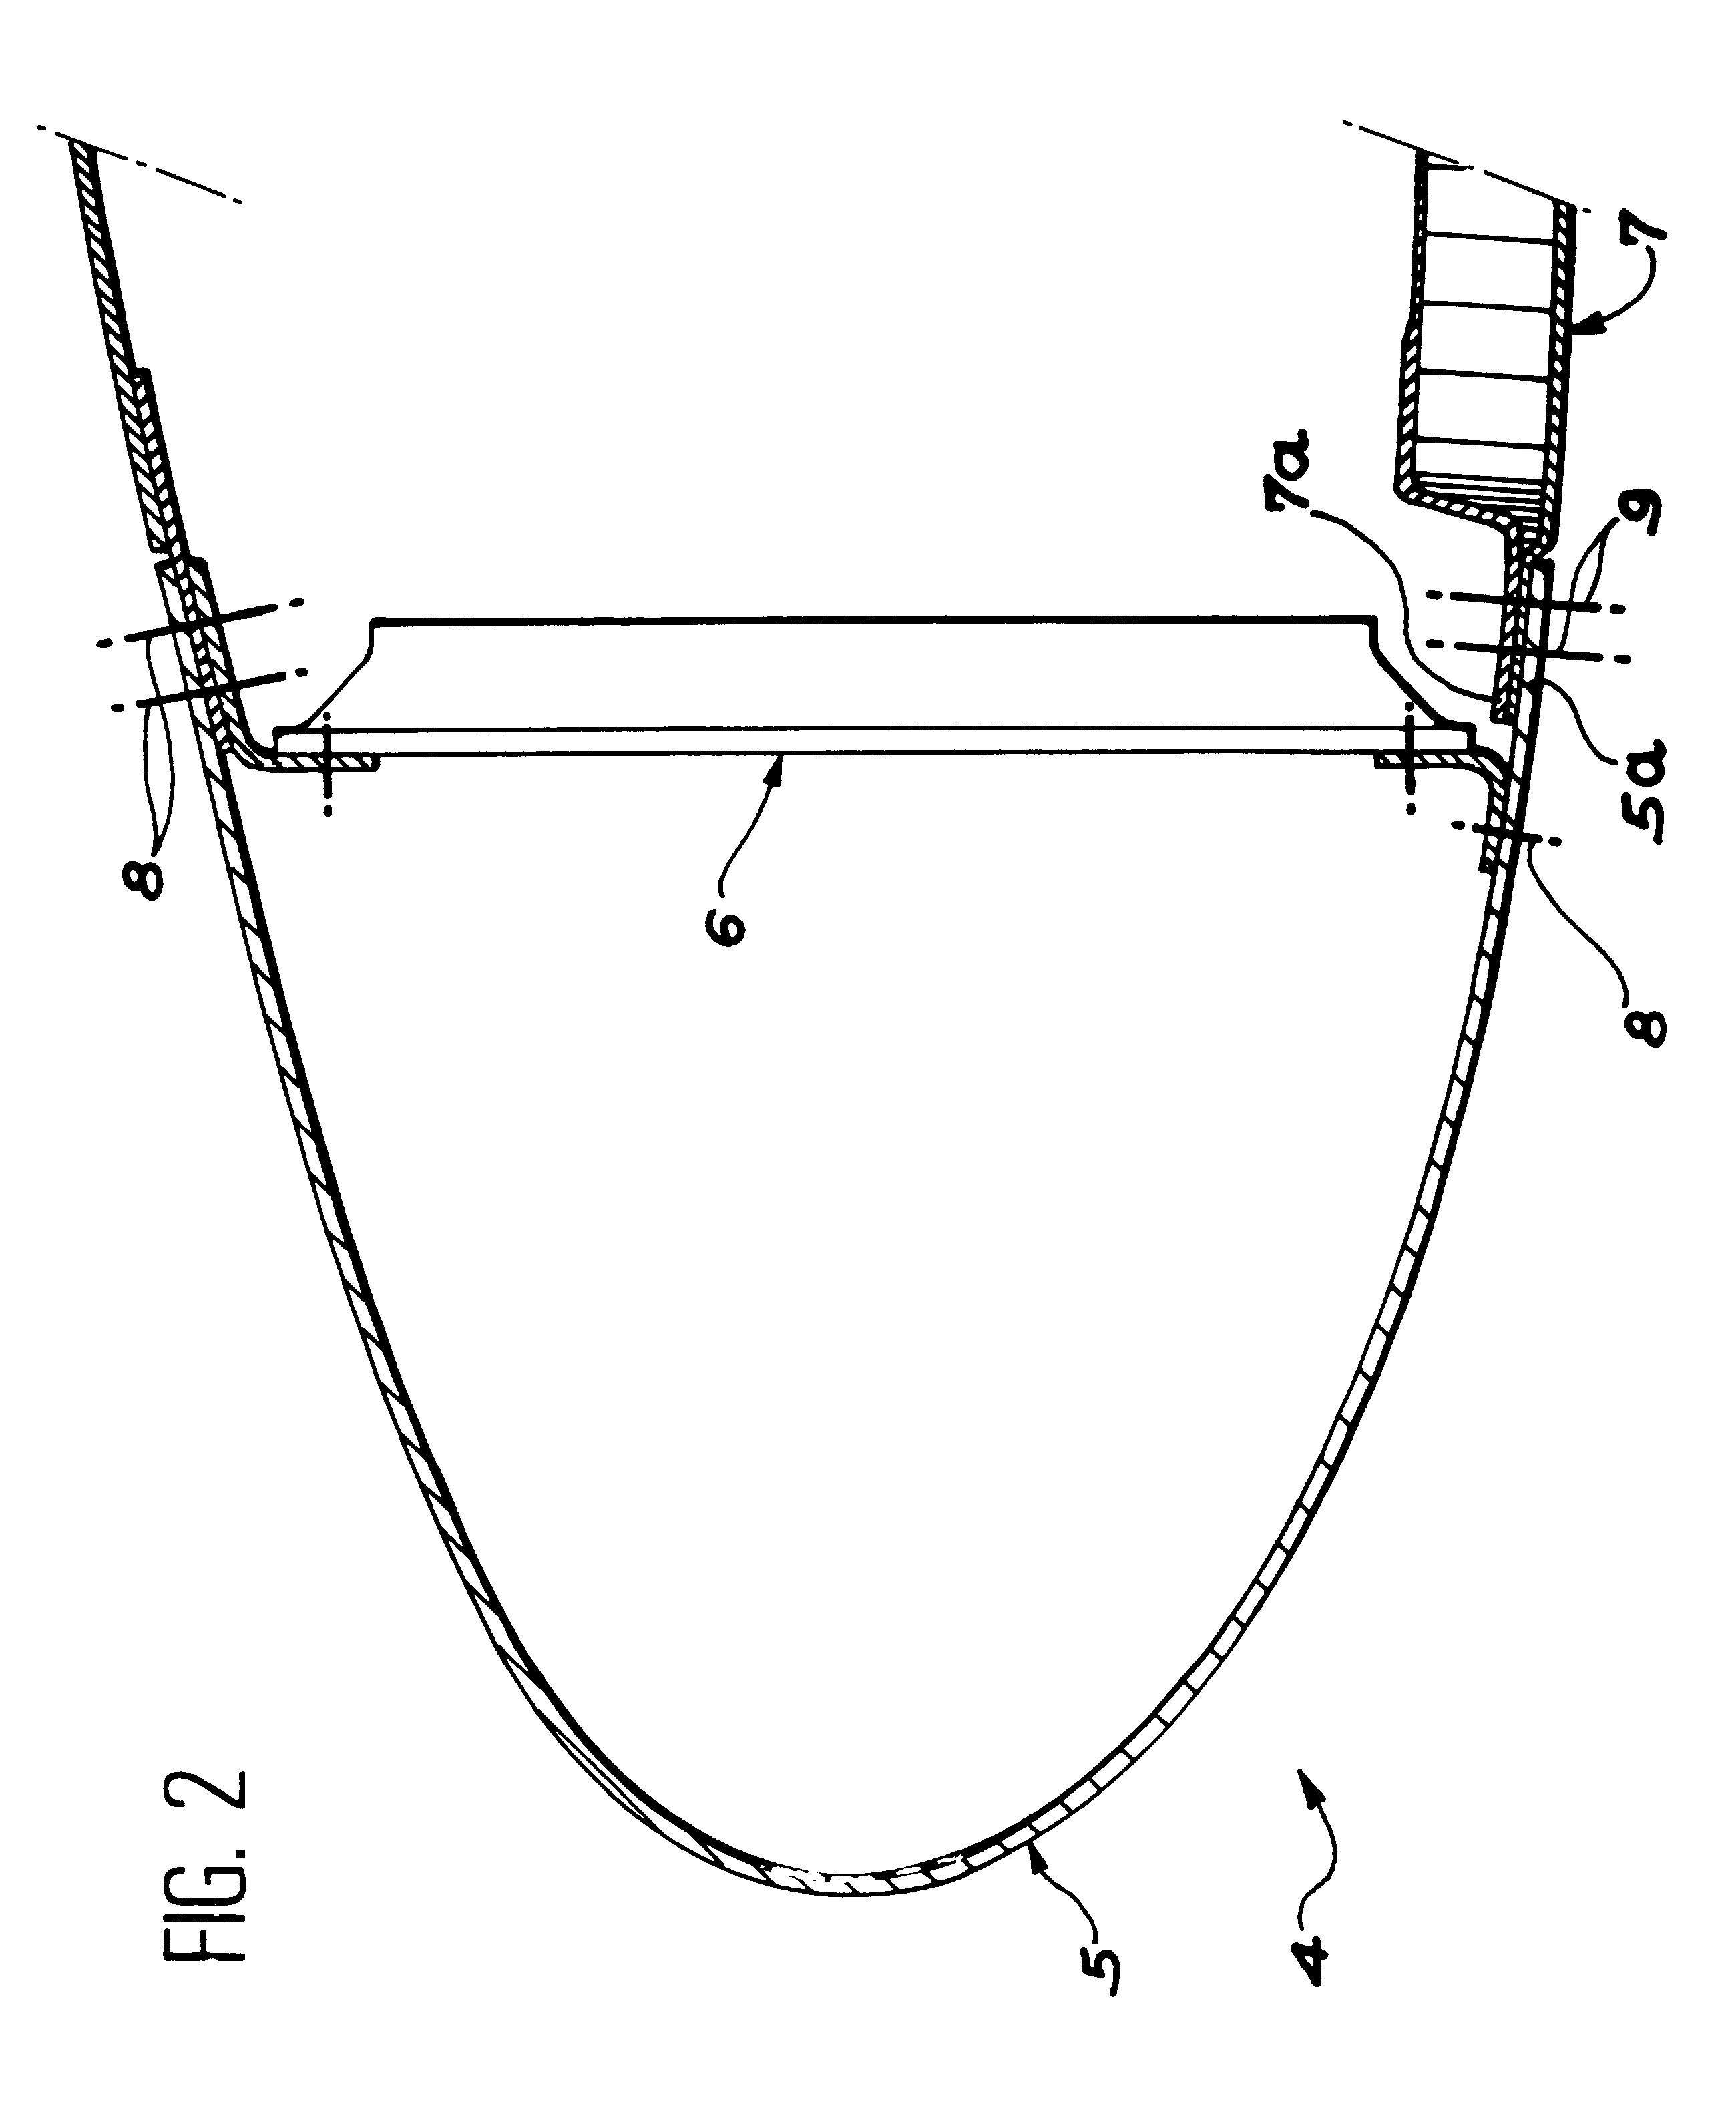 Air intake structure for aircraft engine